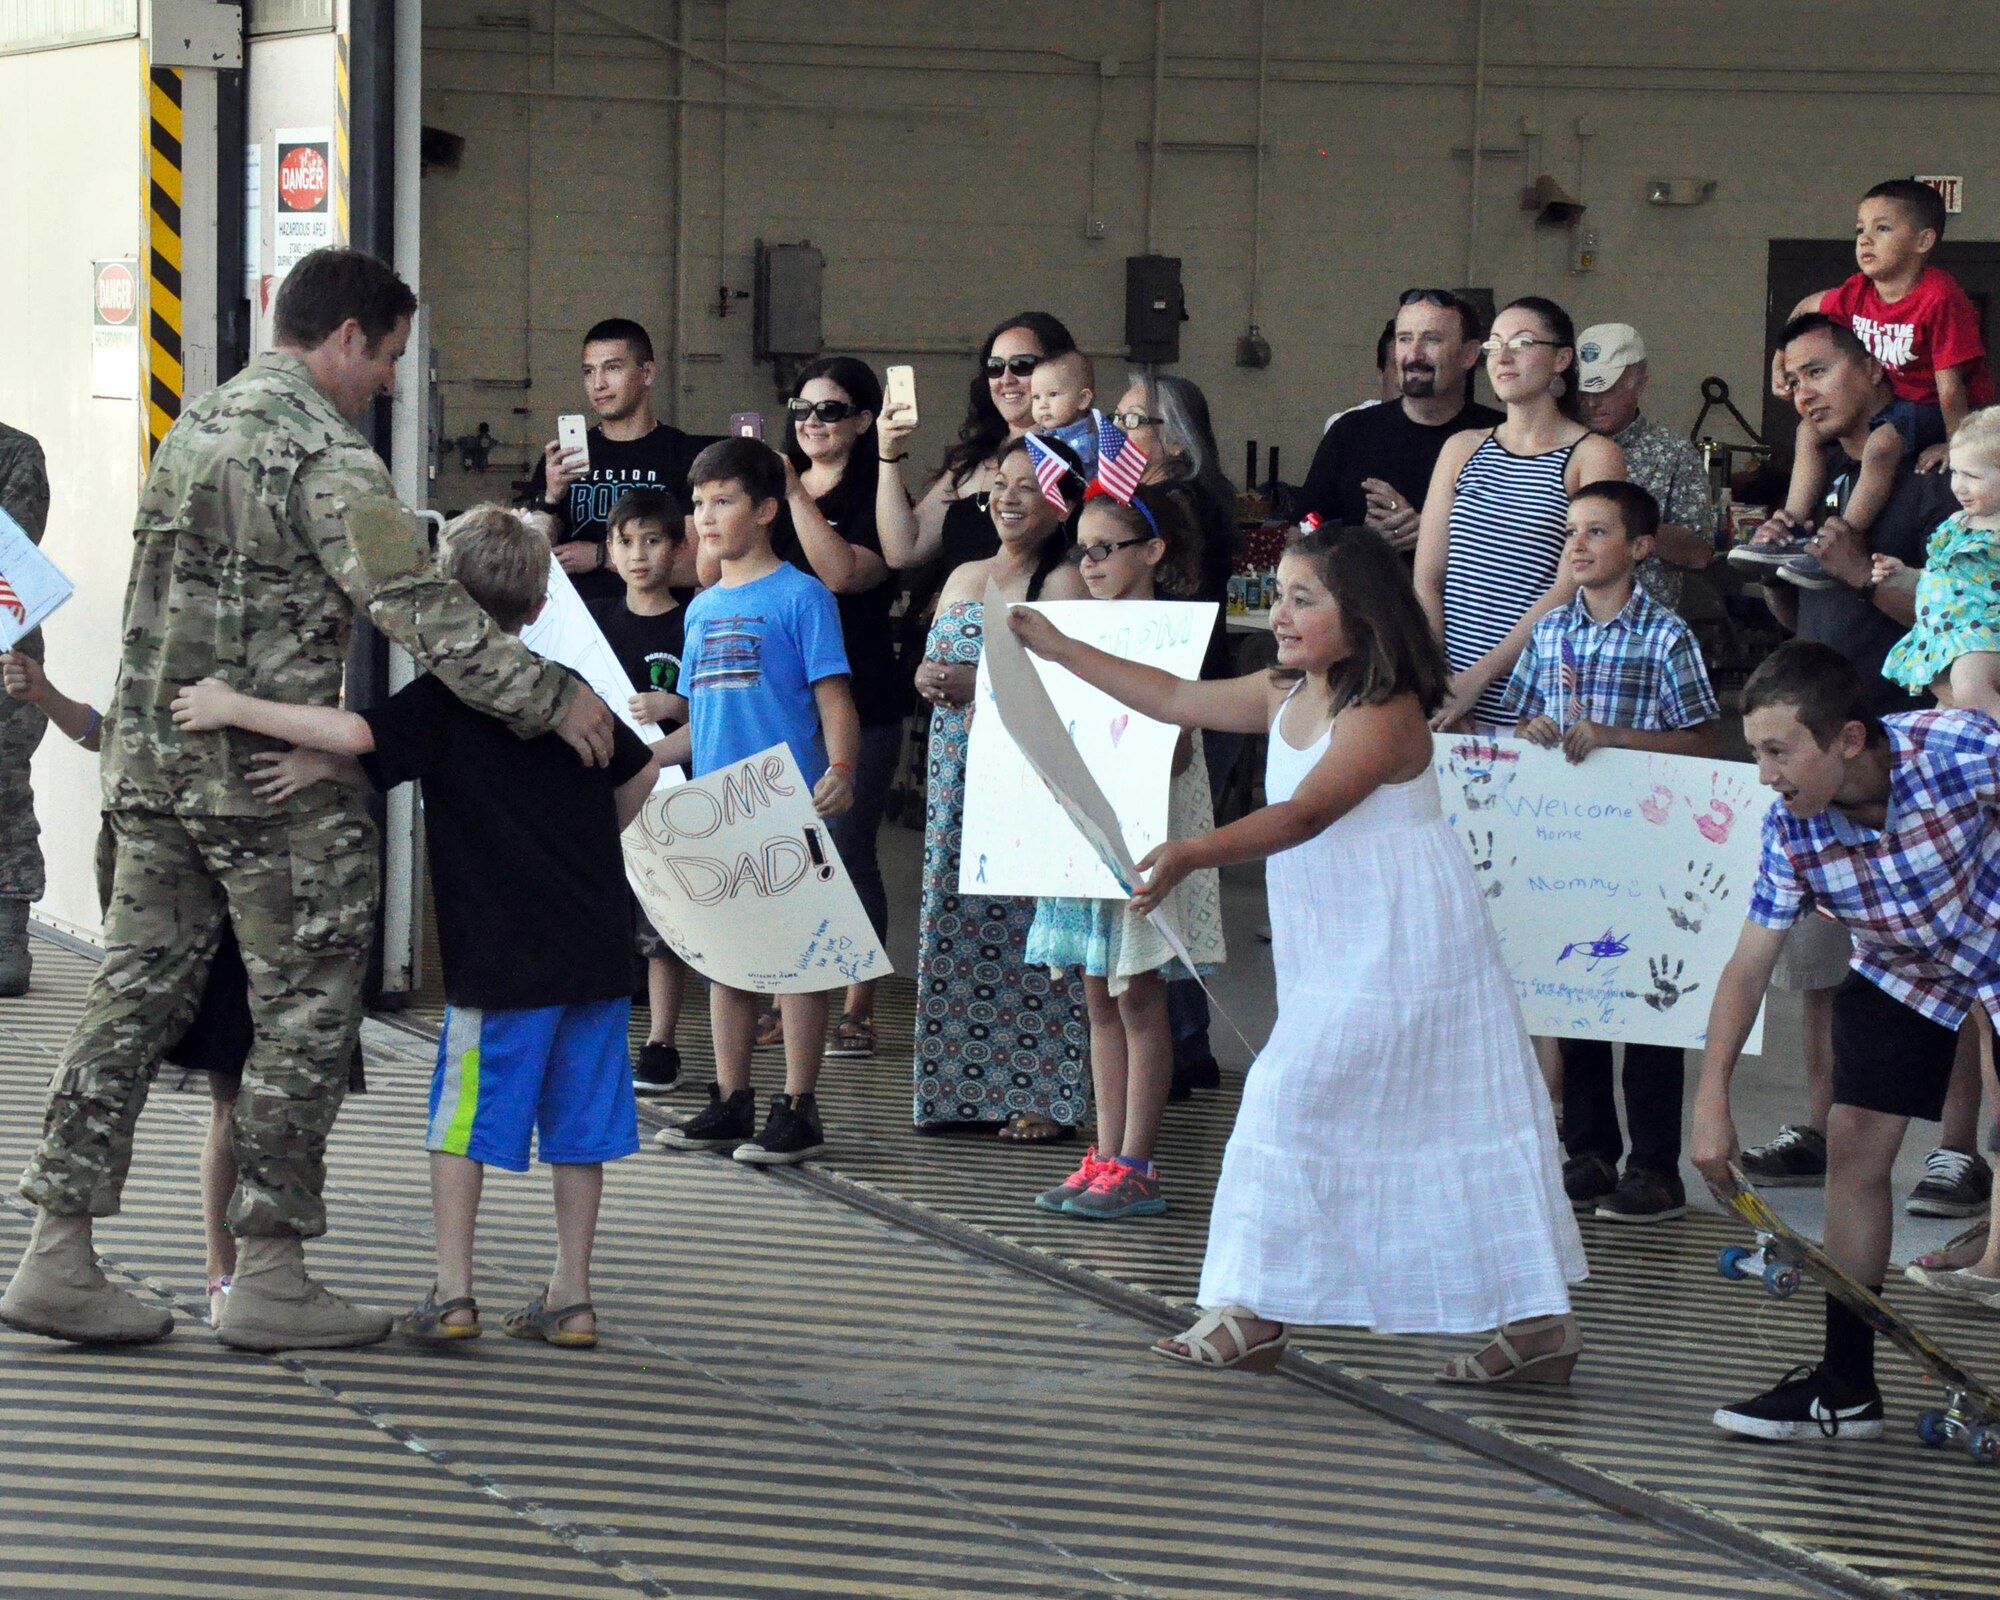 Families greet their loved ones upon the return of the 306th Rescue Squadron to Davis-Monthan Air Force Base, Ariz., from the Horn of Africa June 2. The 306th RQS is part of the 943rd Rescue Group, the Air Force Reserve Command's premier combat search and rescue group. They were deployed for four months and saved six lives during the deployment, flew more than 500 combat hours, conducted 67 parachute deployments, and provided more than 2,600 hours of dedicated alert coverage. (U.S. Air Force photo/Master Sgt. Greg Gaunt)